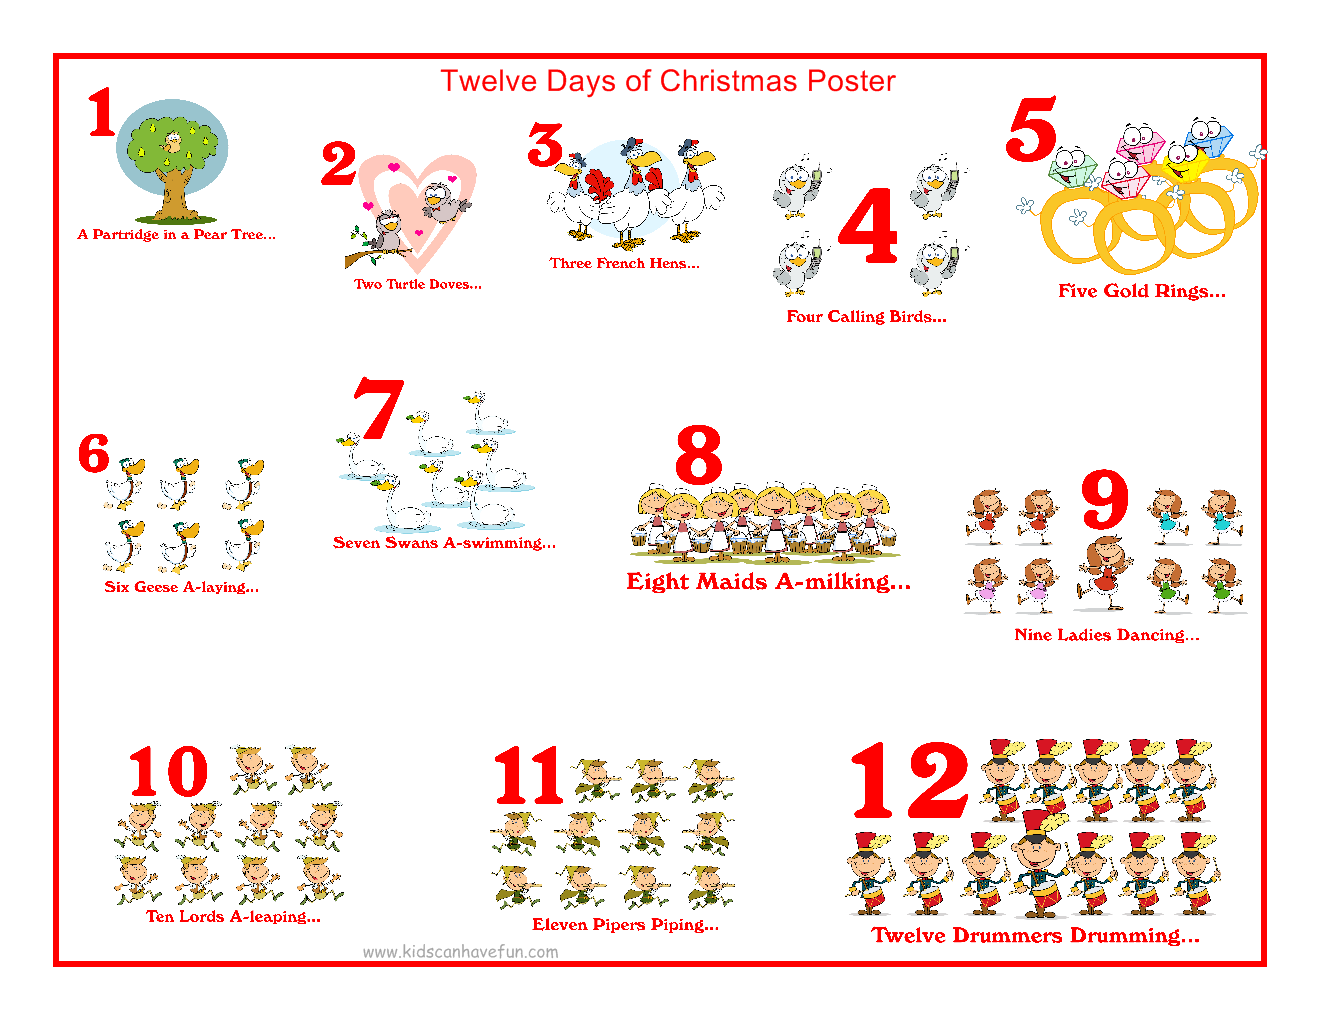 What are the 12 days of Christmas items?